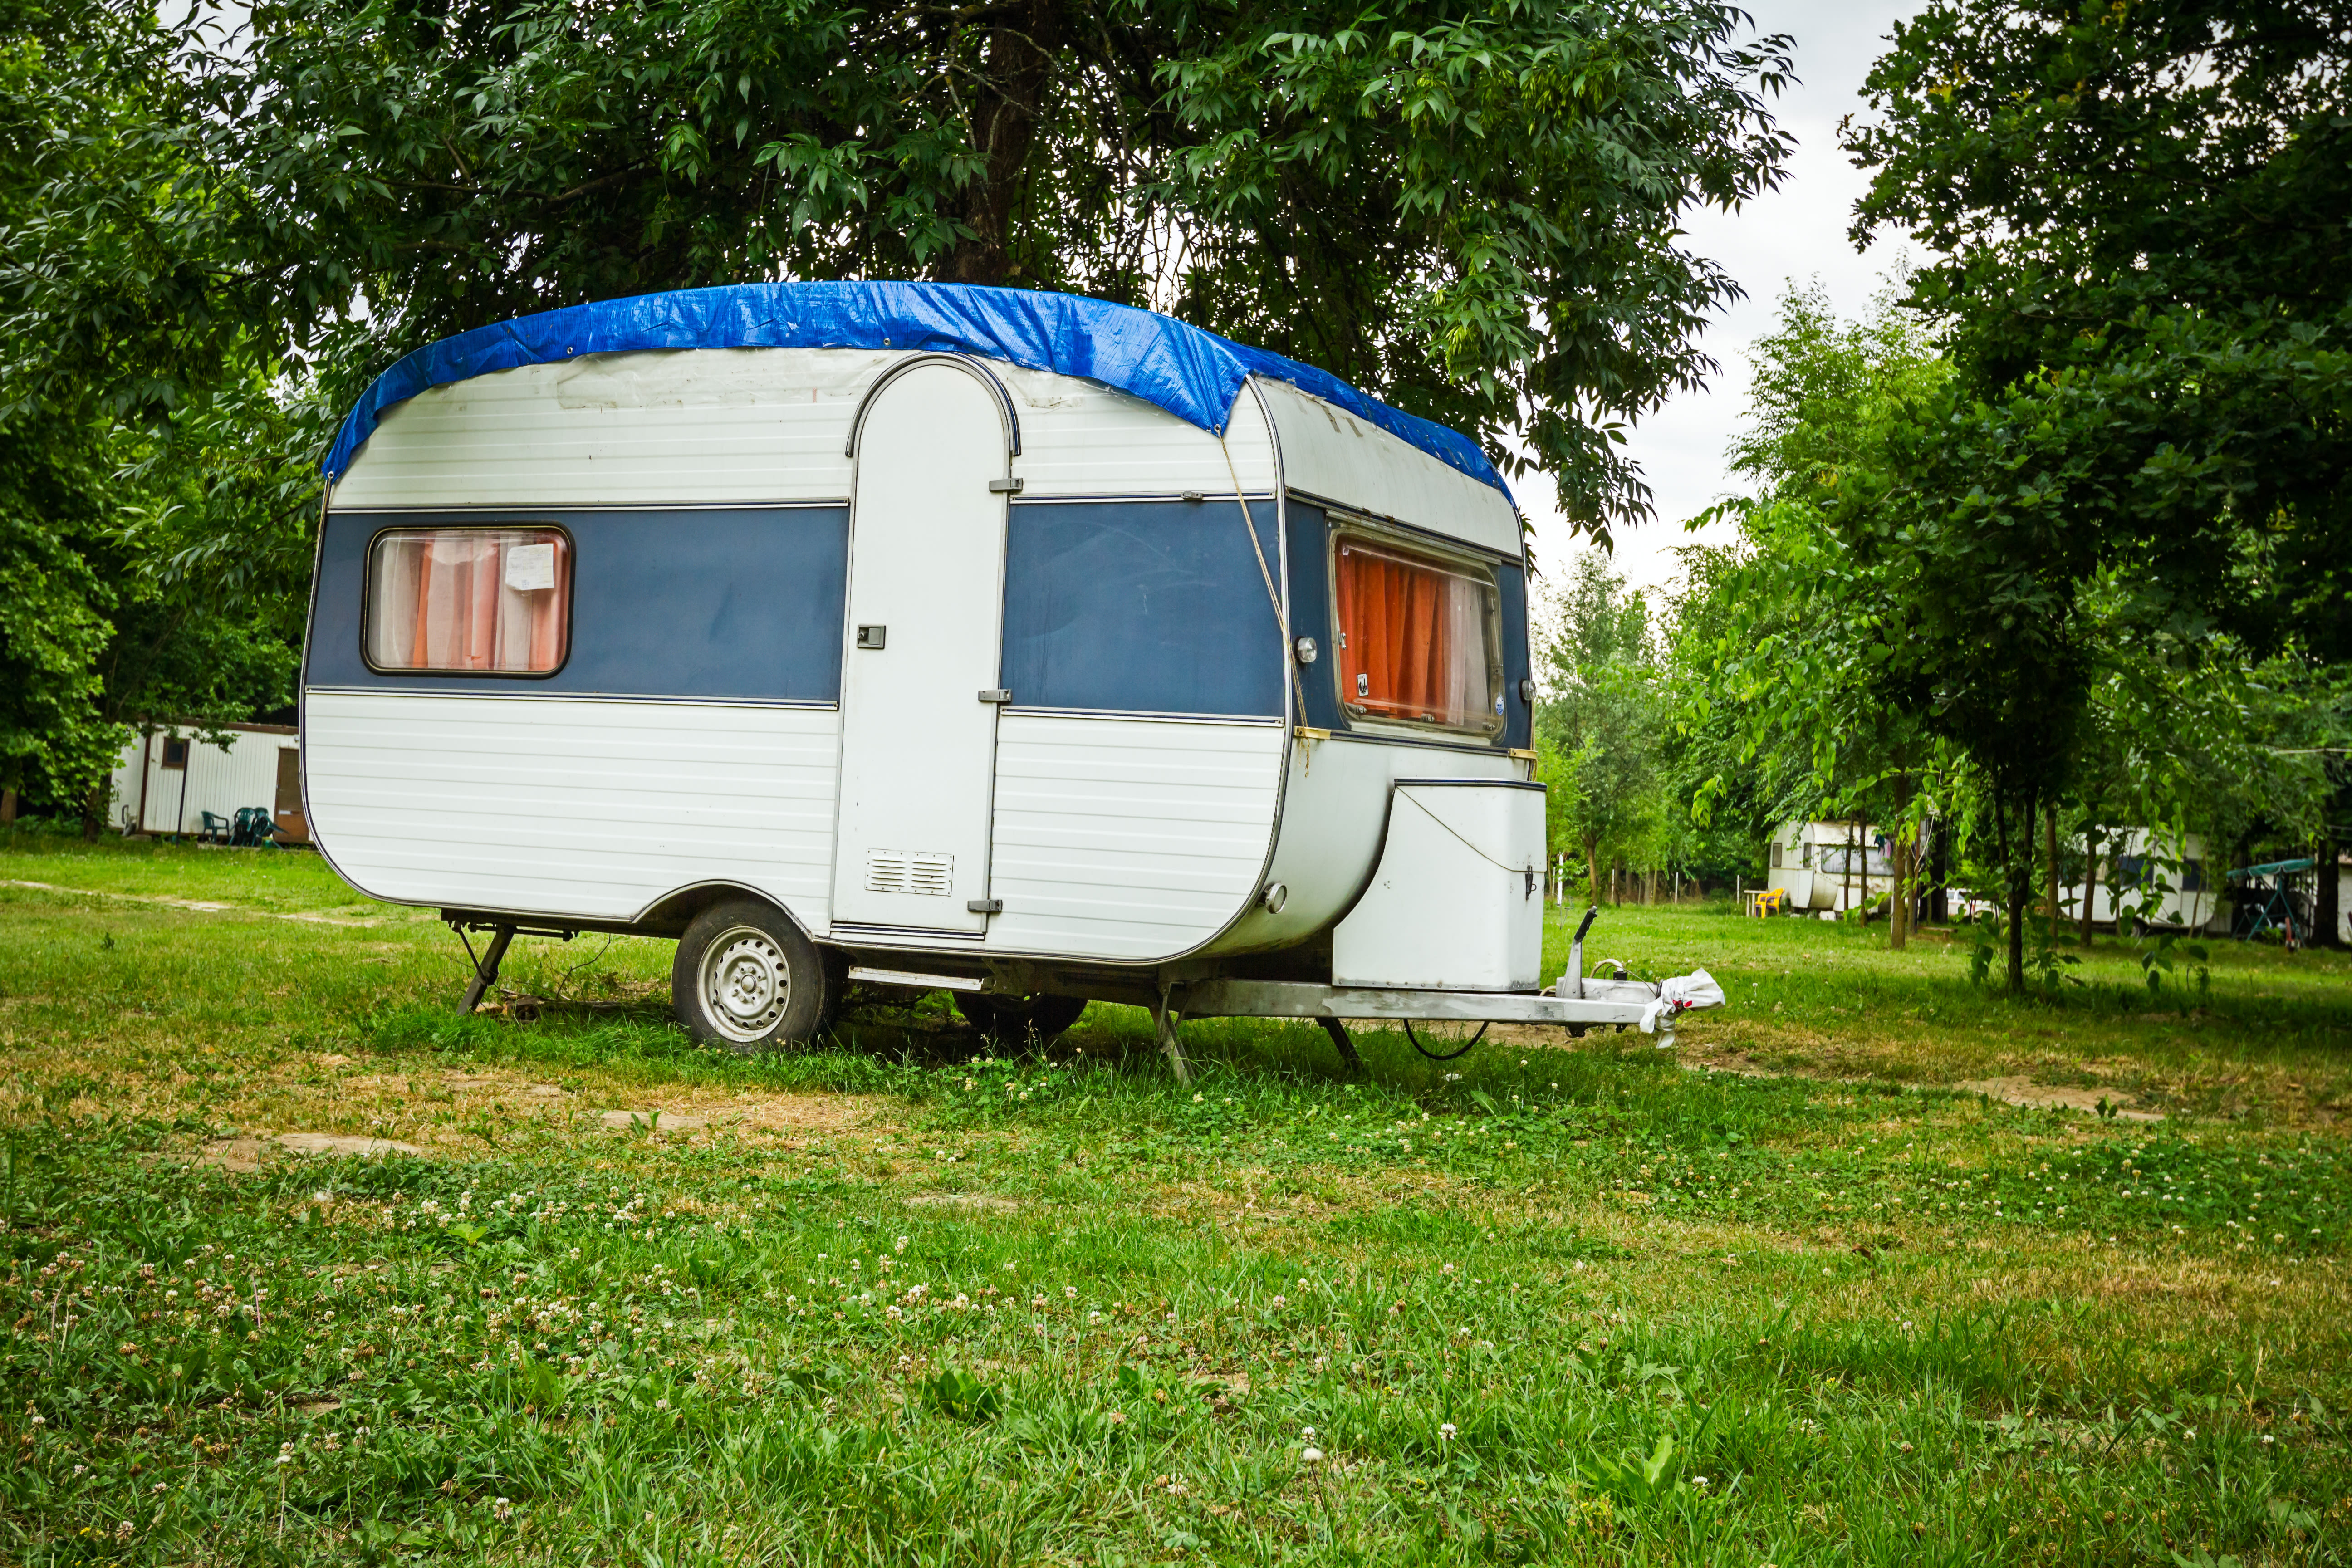 Chattel loans: How to finance your manufactured or tiny home